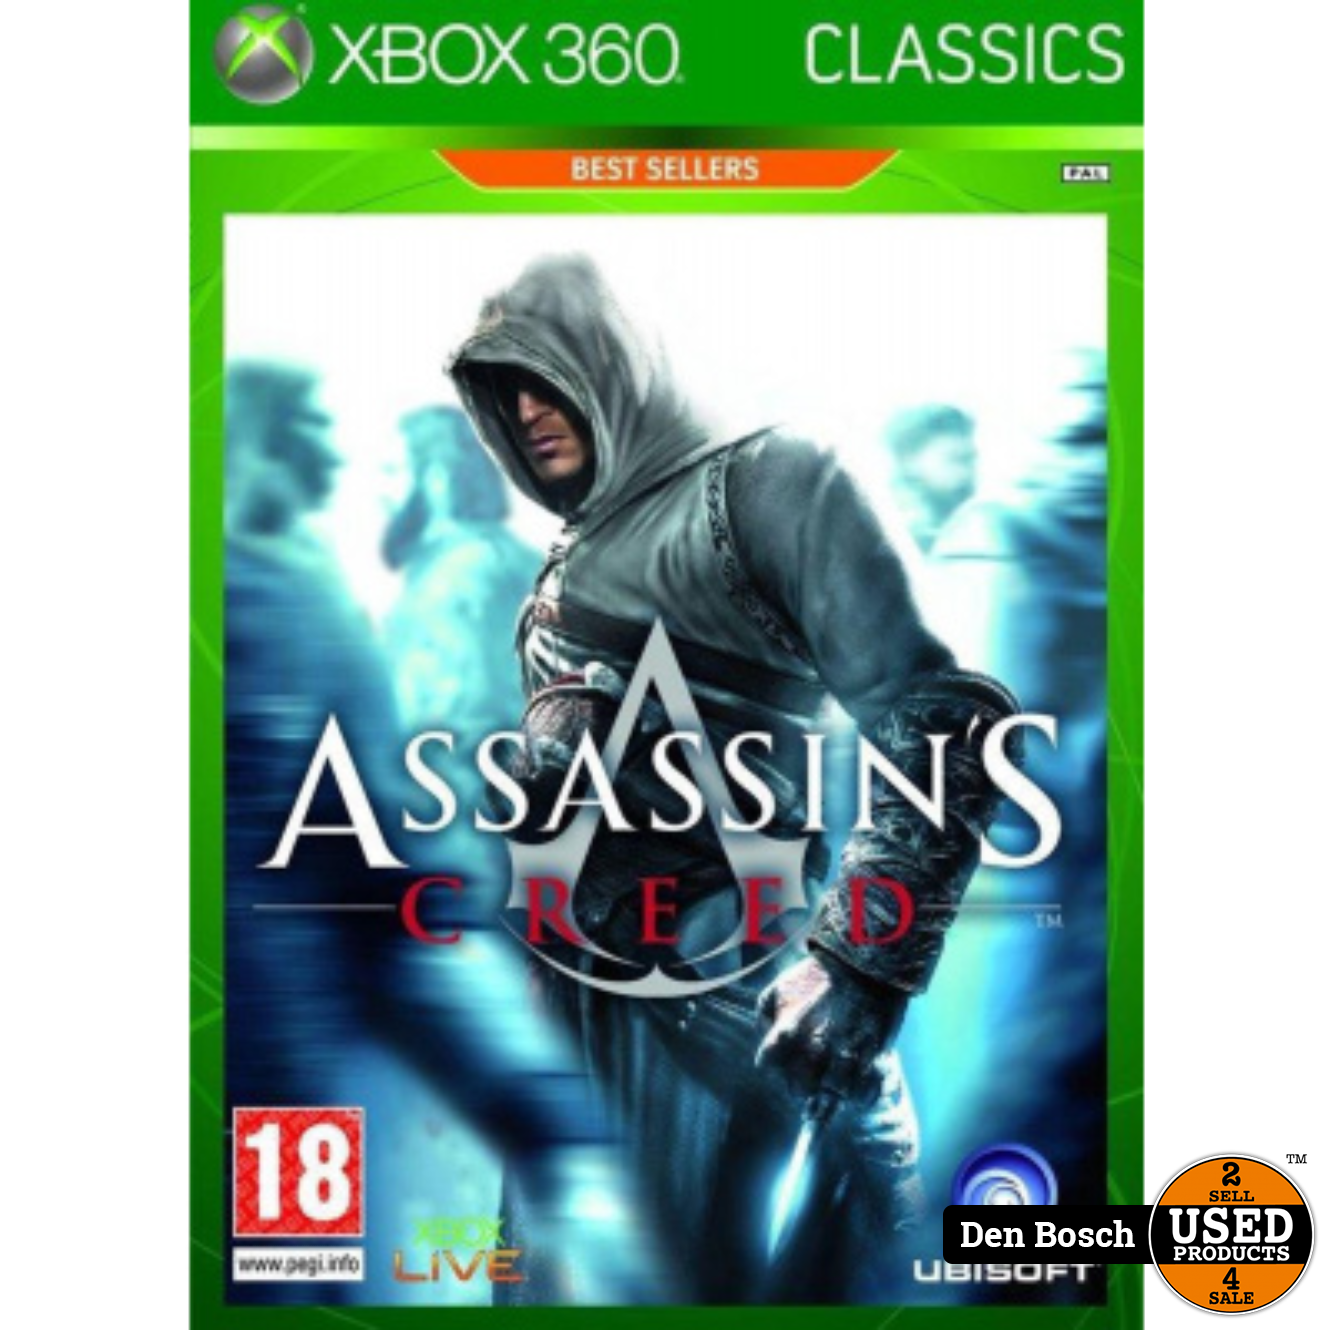 Inspecteren JEP excuus Assassin's Creed Classics - Xbox 360 Game - Used Products Den Bosch